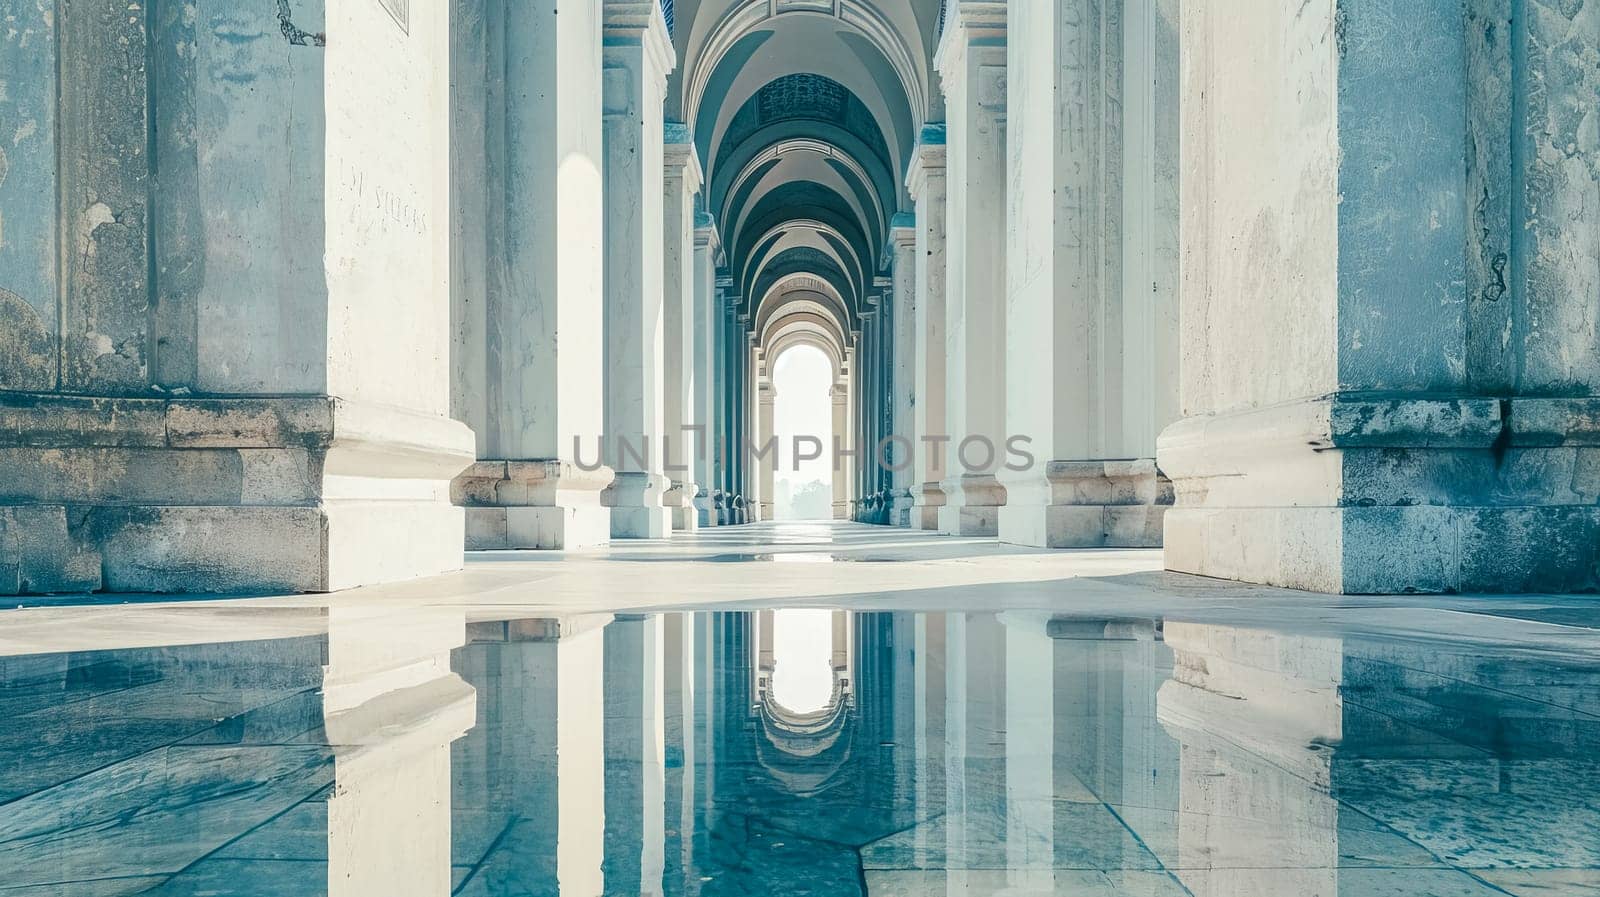 Serene hallway with arches and reflective floor by Edophoto